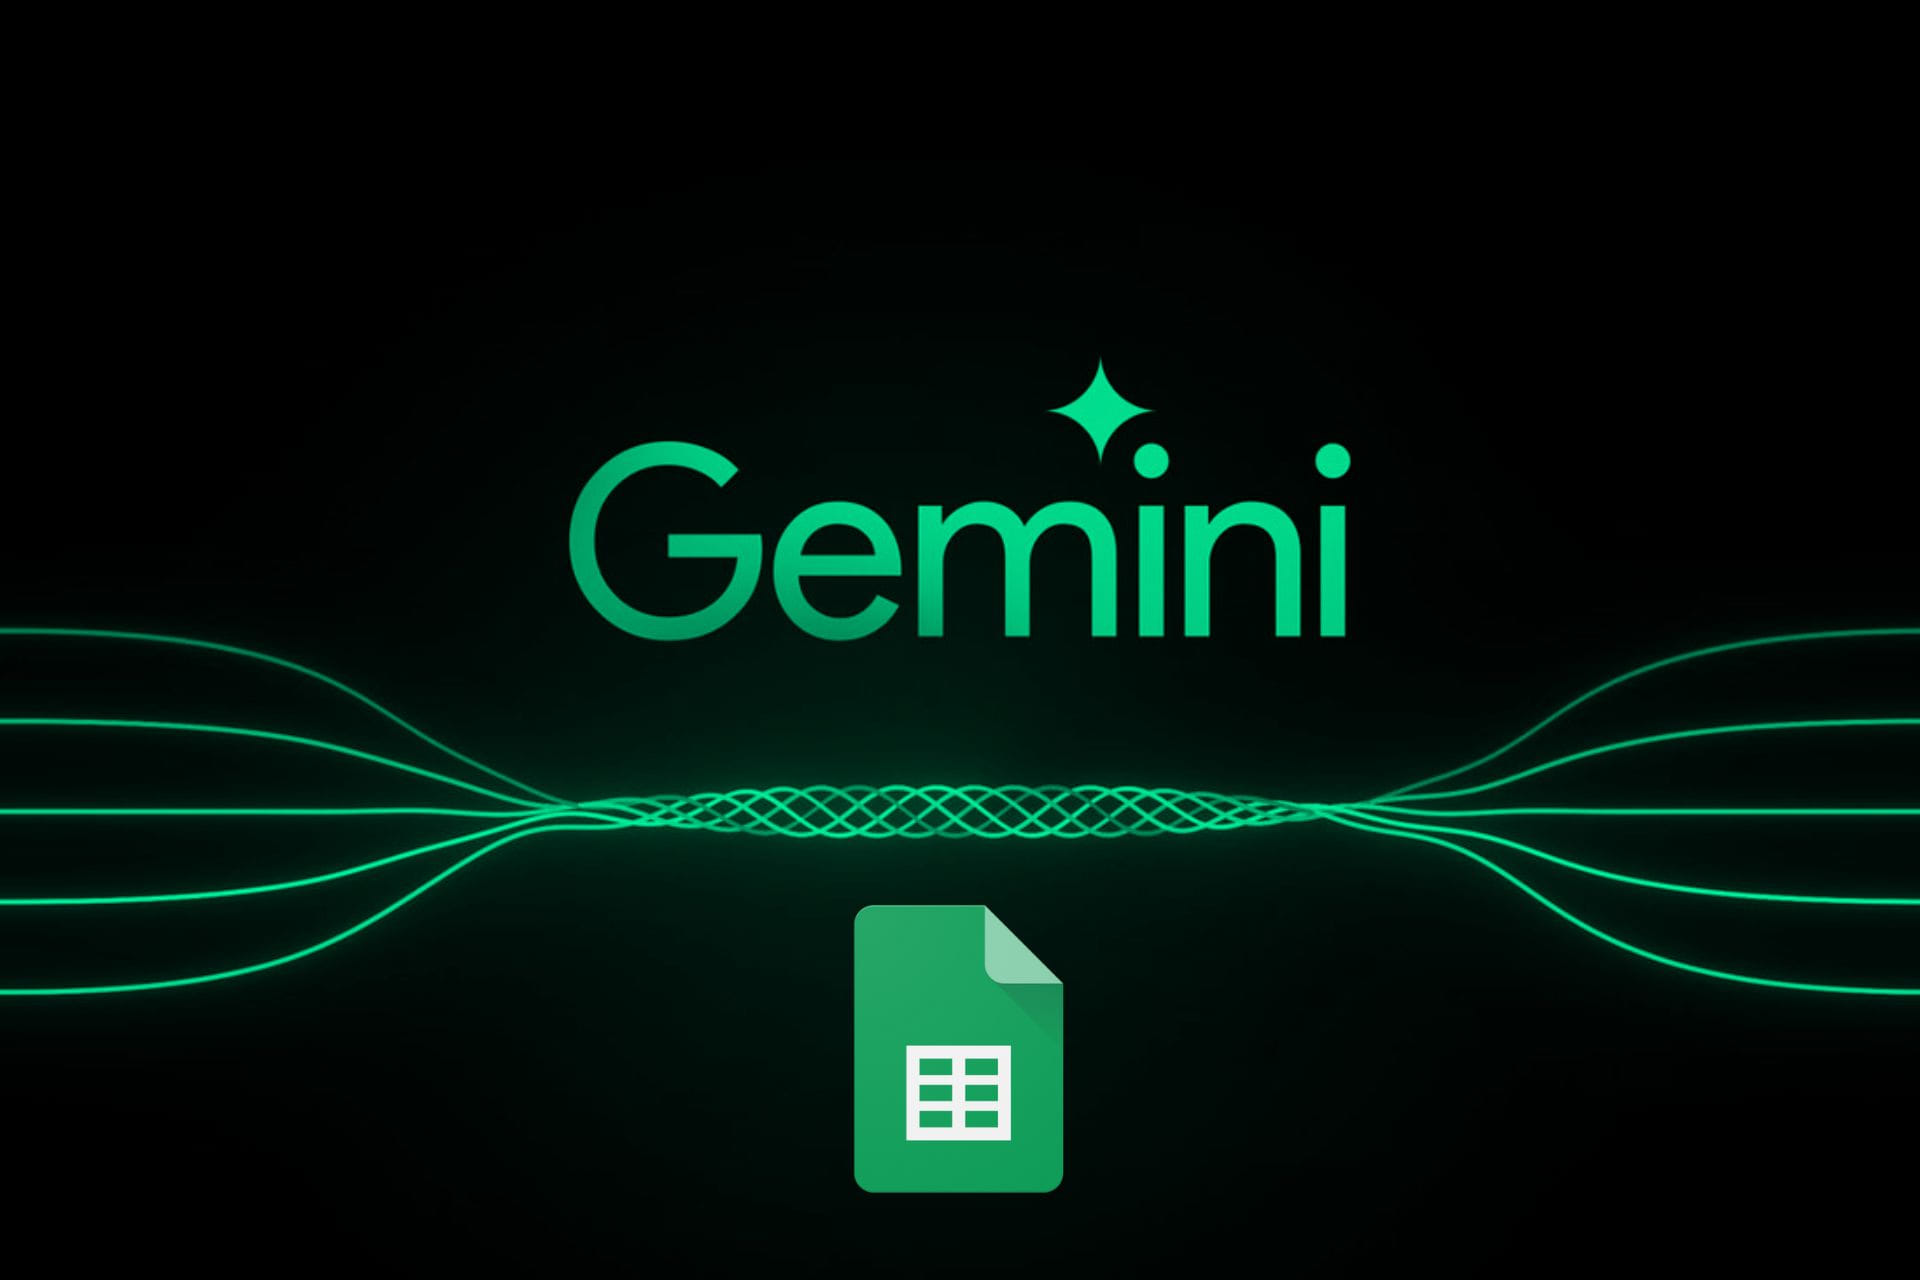 Google takes after Microsoft and integrates Gemini in Sheets